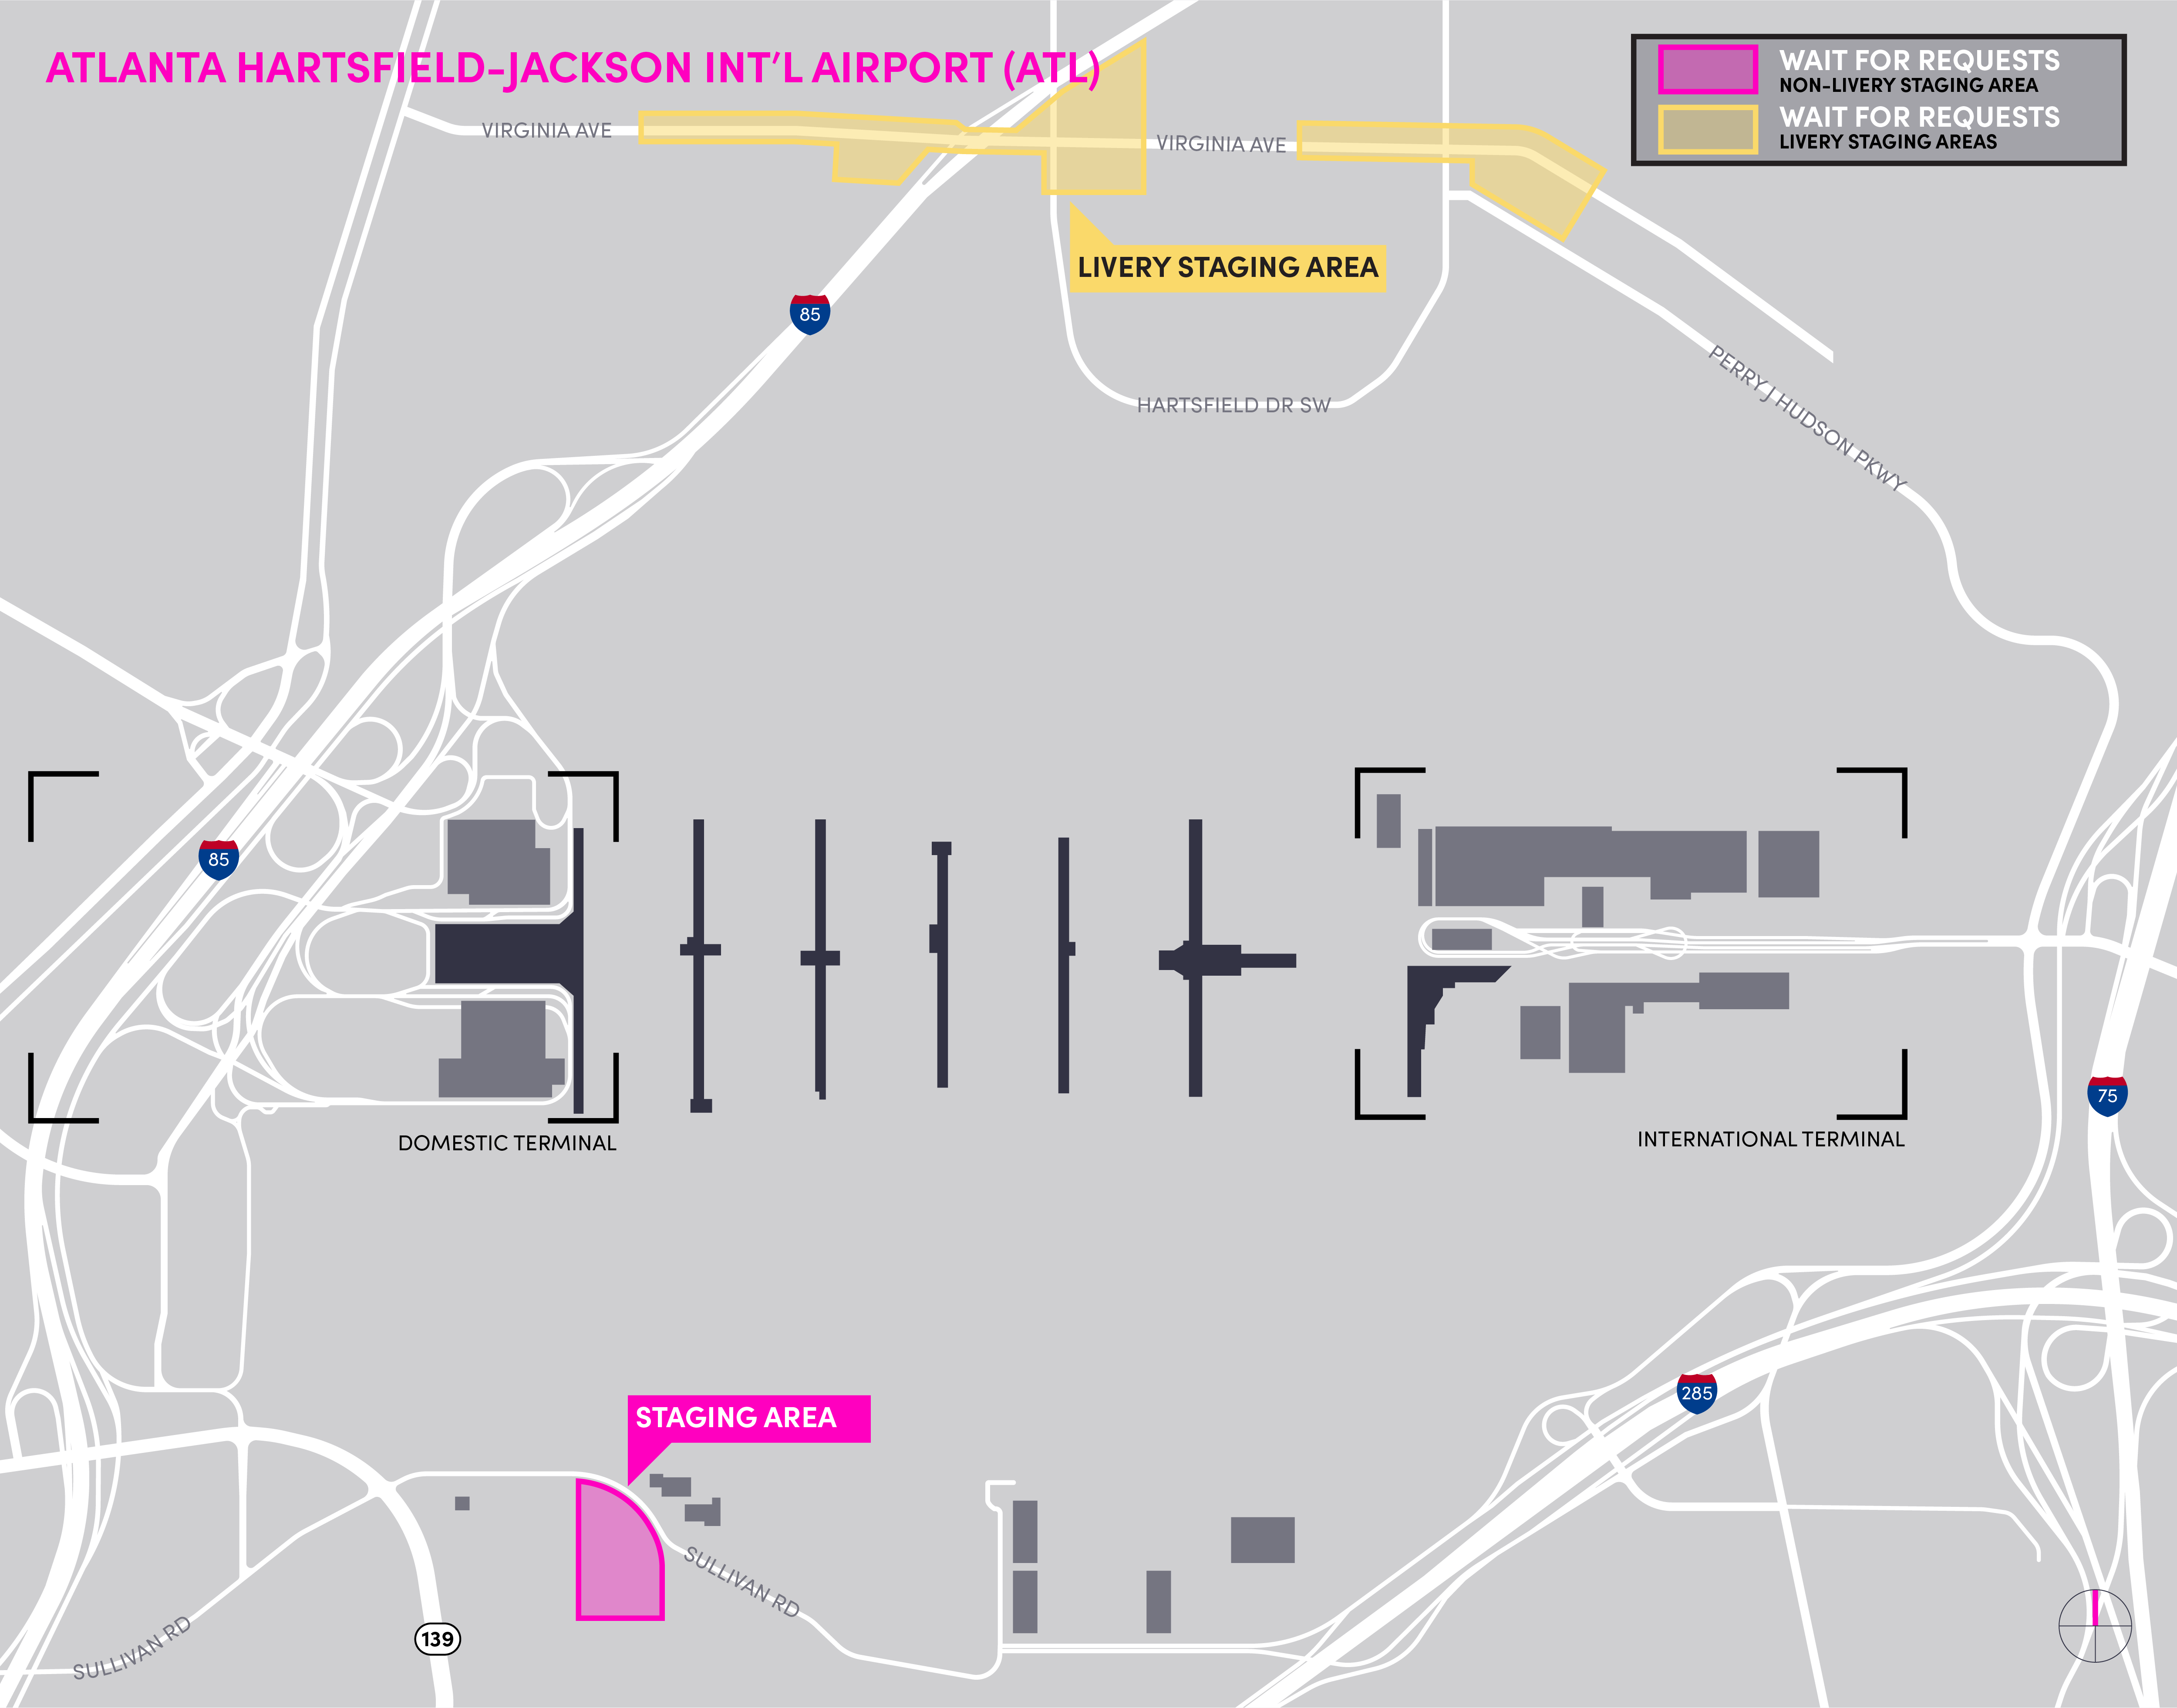 Map of ATL airport detailing staging area and Livery Staging Area.